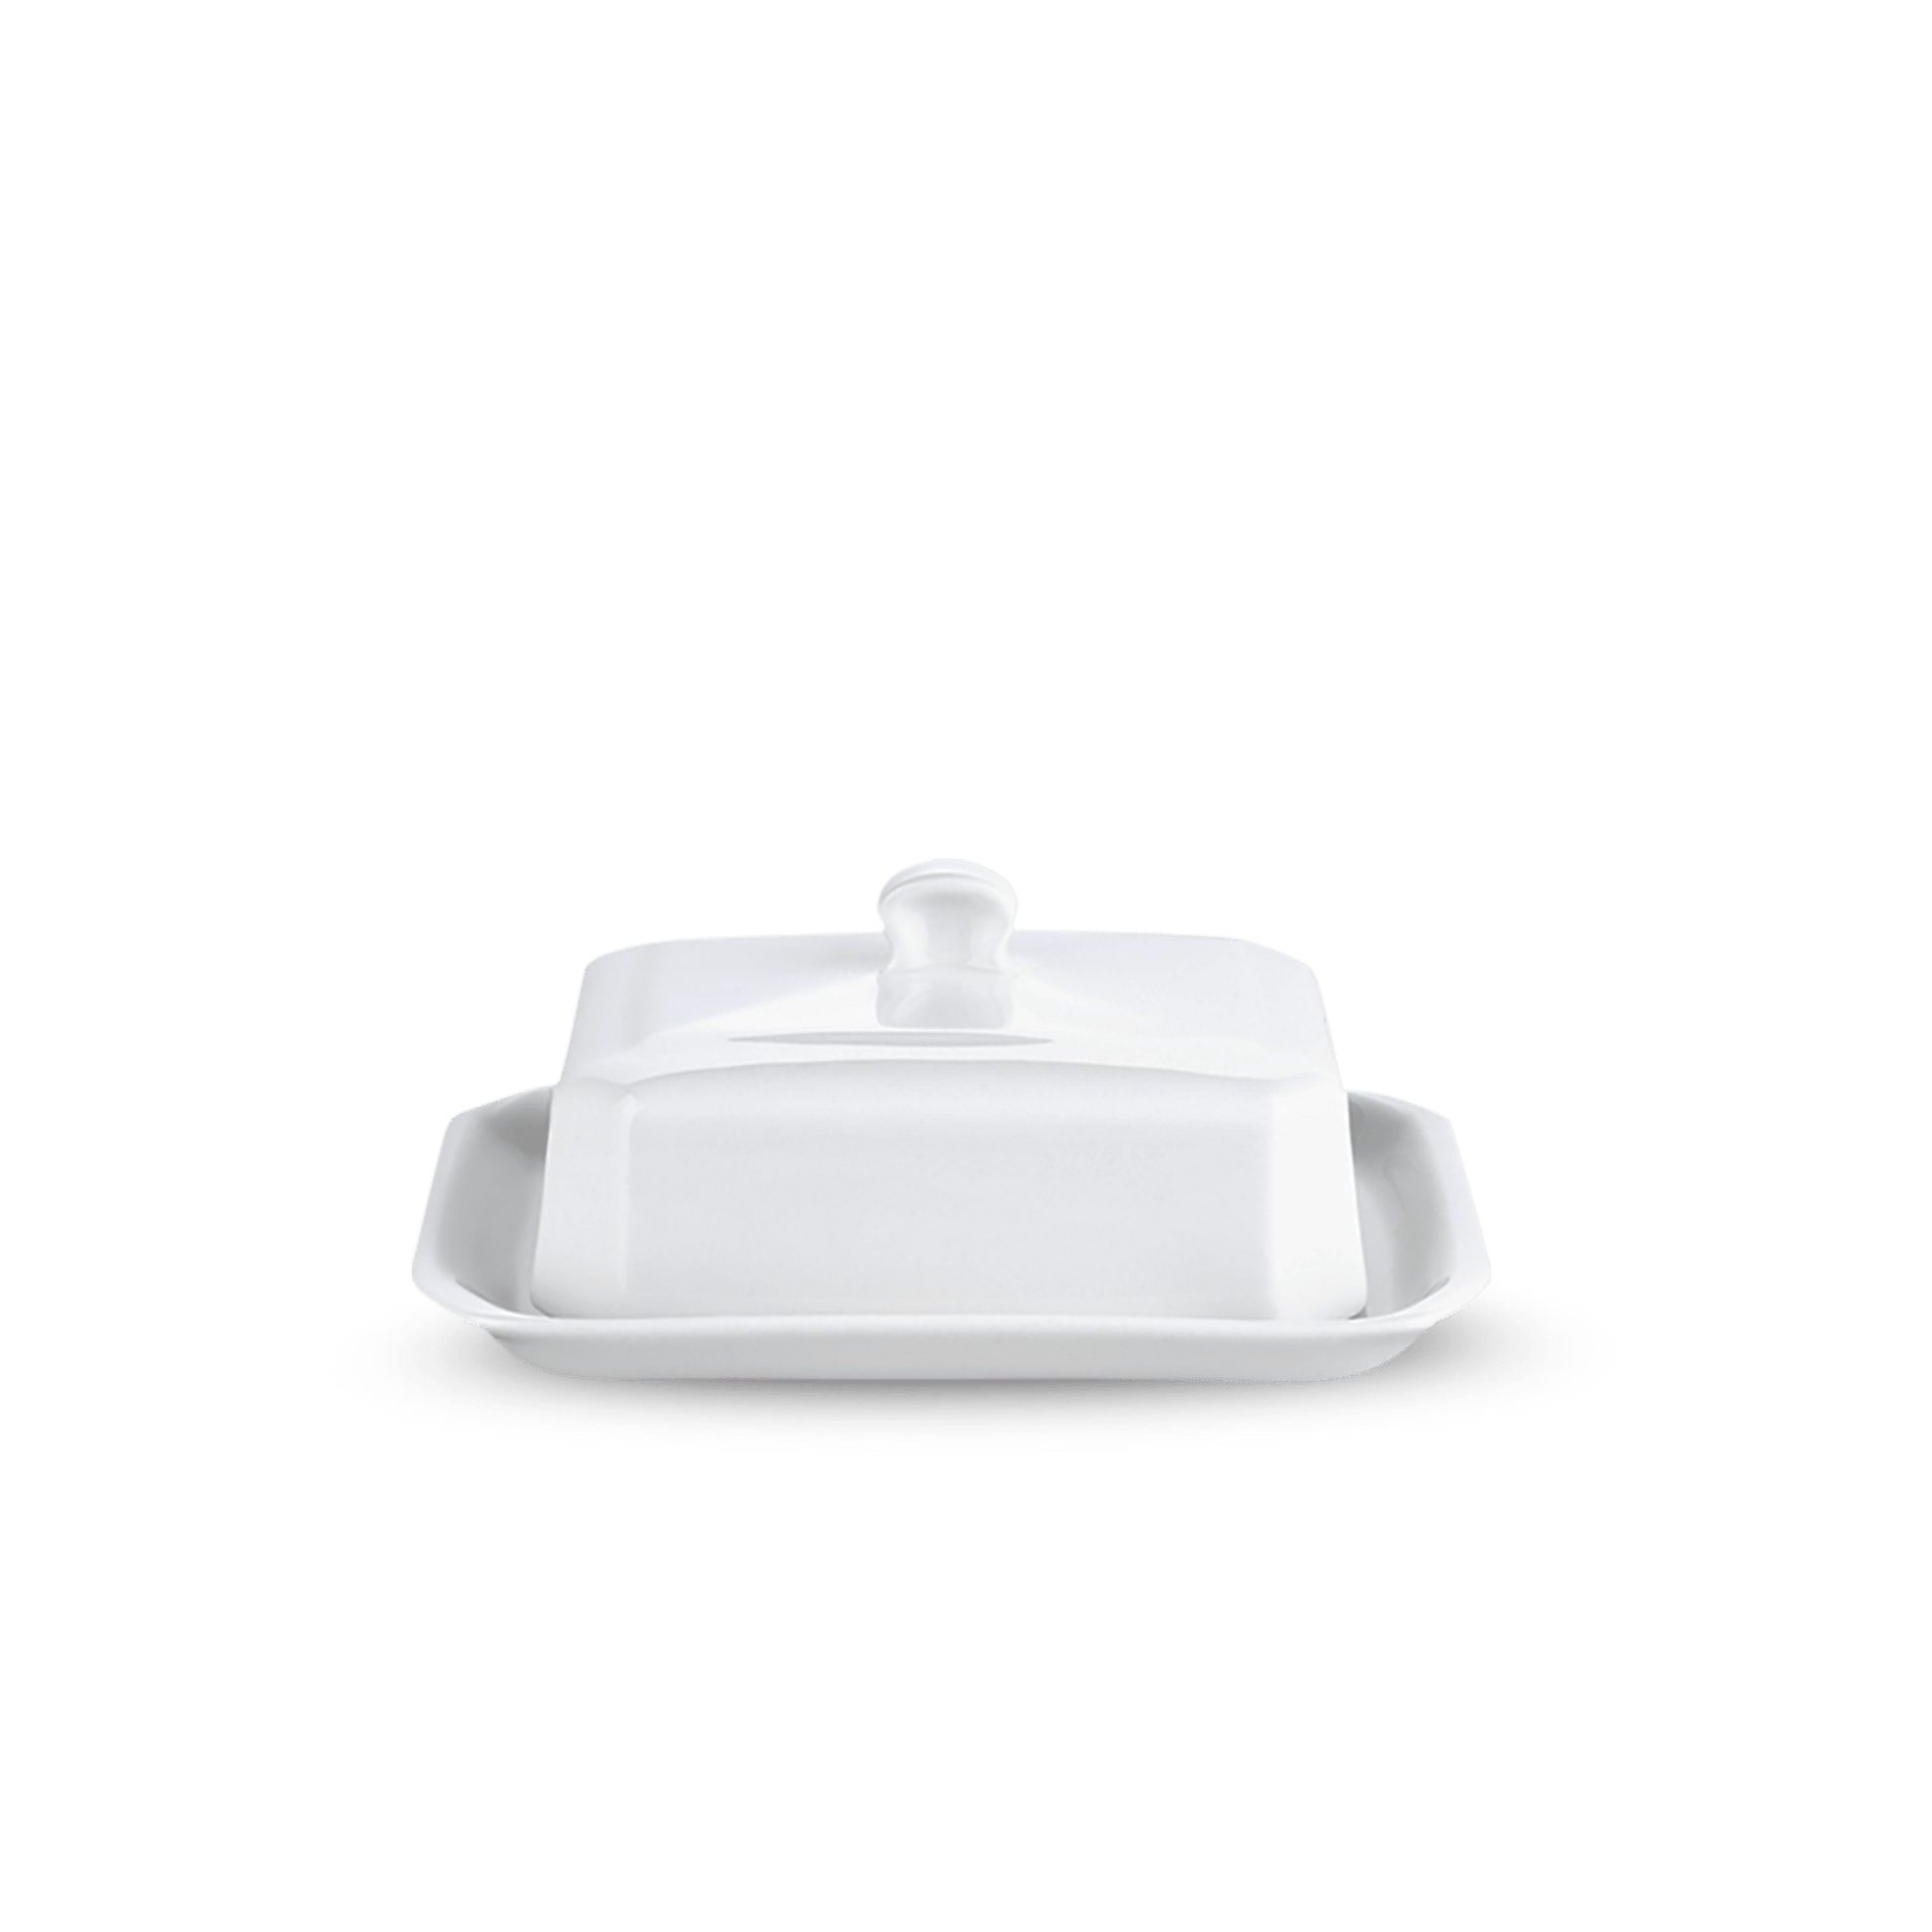 Pillivuyt Shop Butter Dish 7.25" L x 4.25" W Large Butter Tray with Cover, European Style